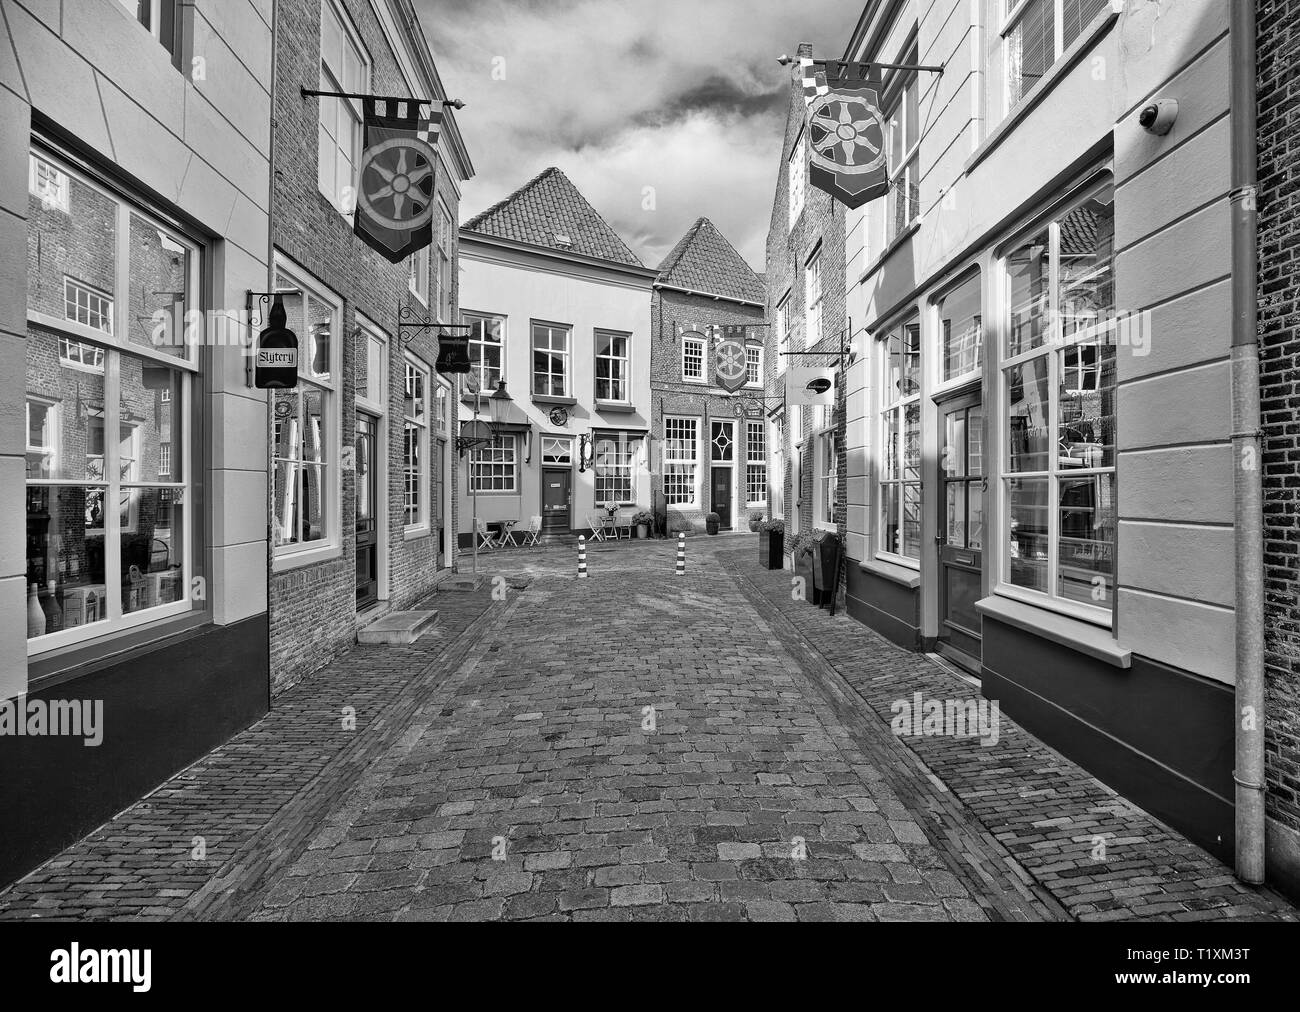 Ancient alley with shops. Heusden currently draws over 350 thousand tourists annually who visit the historic town and walk the ancient fortress walls. Stock Photo